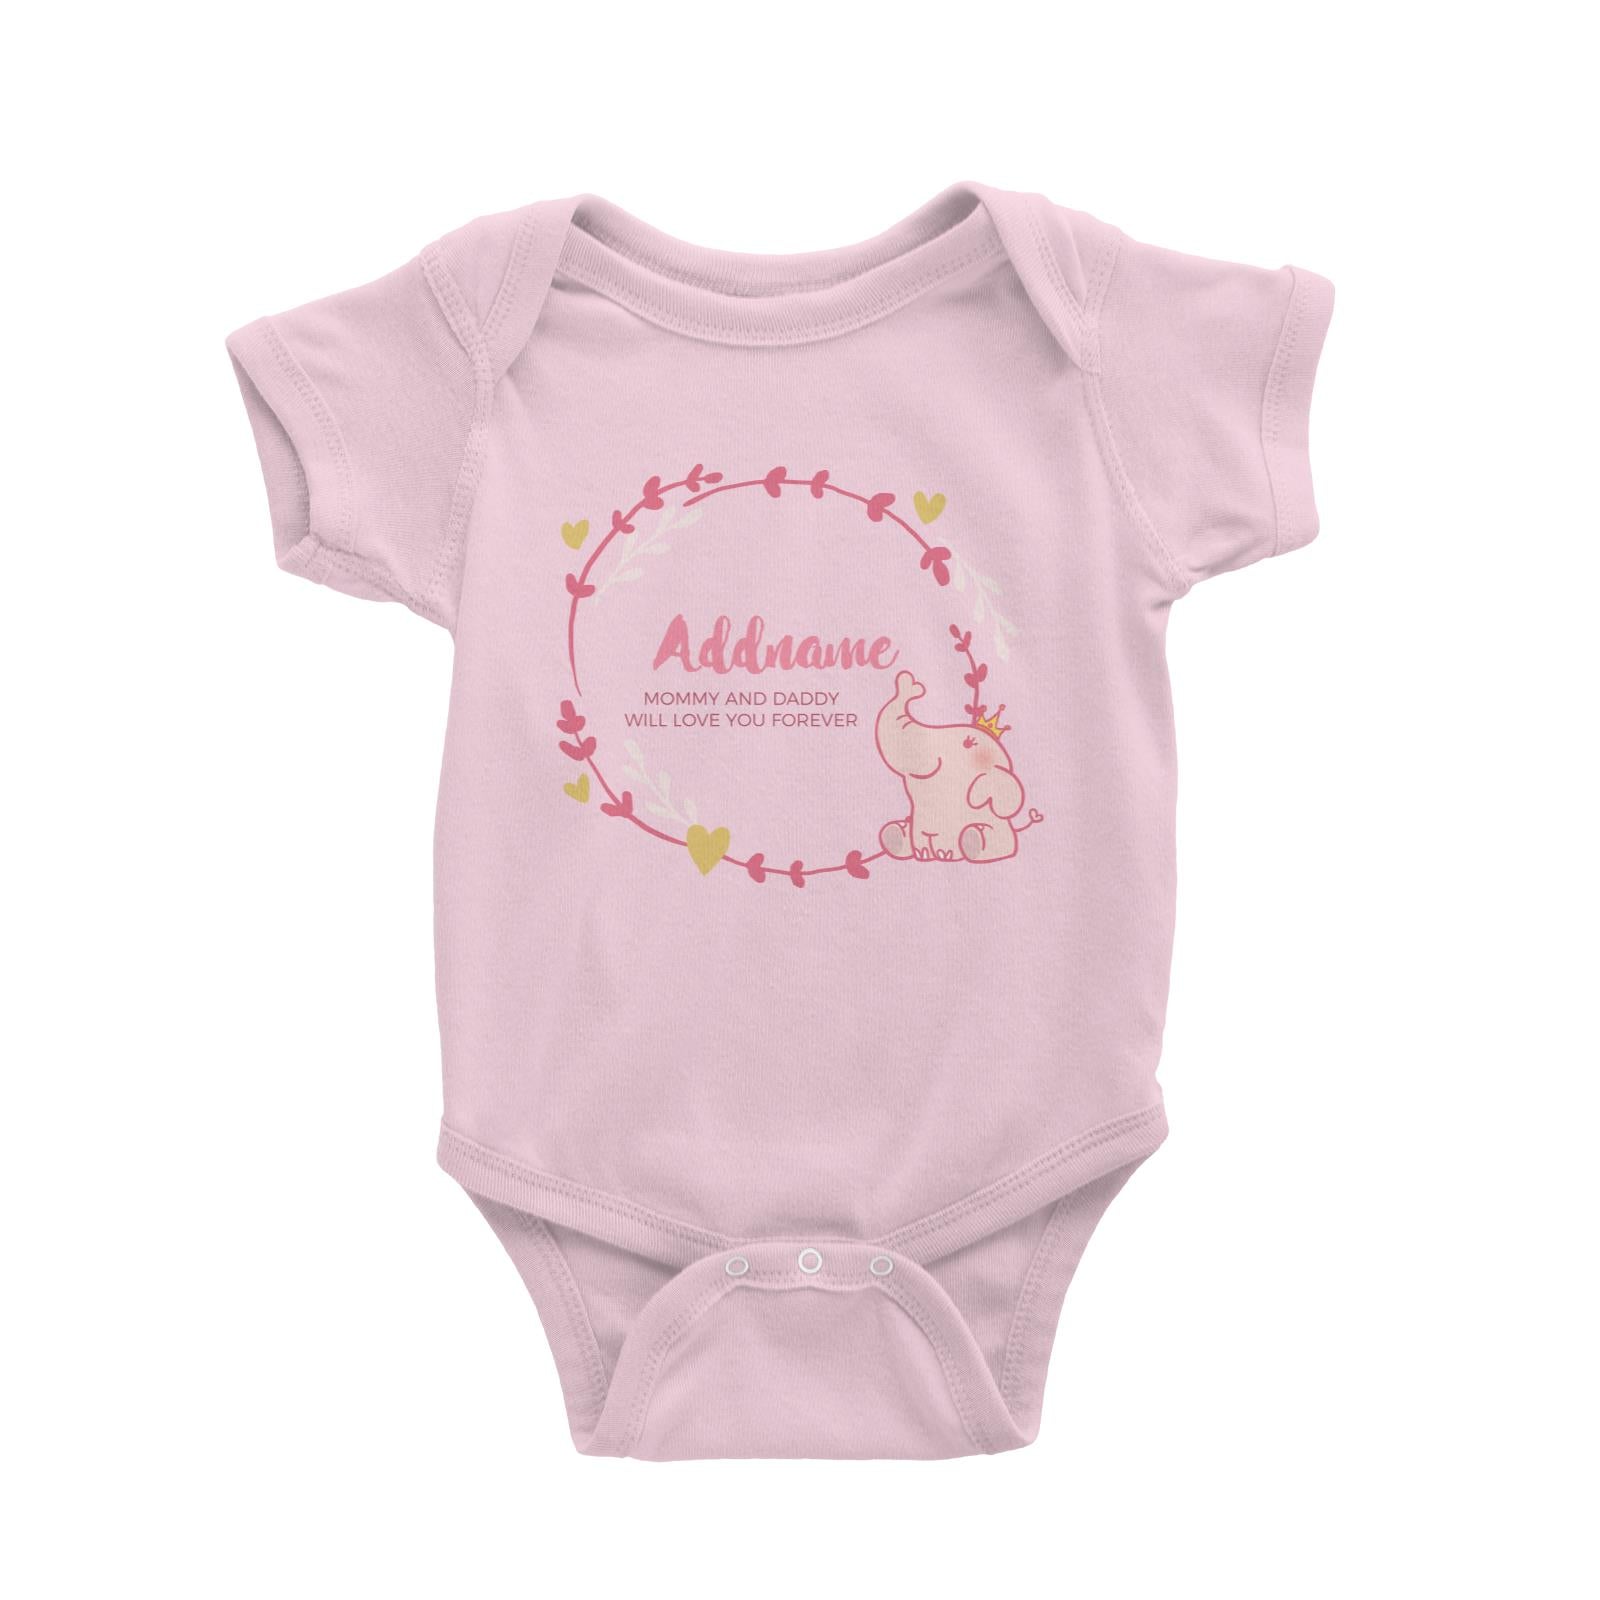 Cute Pink Elephant Princess Personalizable with Name and Text Baby Romper